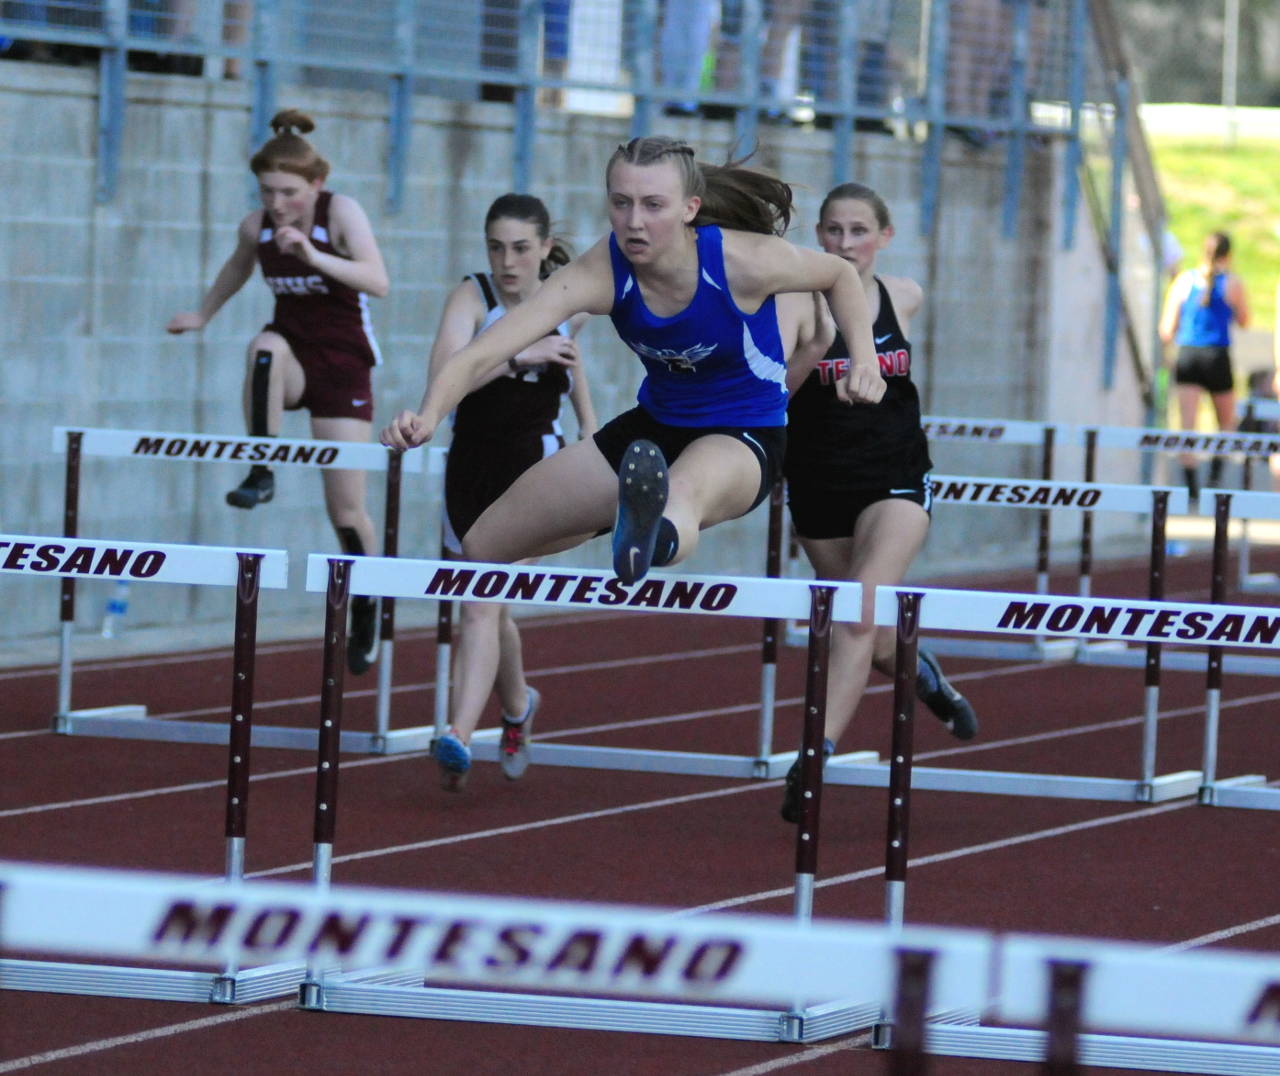 Elma’s Jillian Bieker leads the field en route to a victory in the girls 100 meter hurdles on Friday at Montesano High School. Bieker won the race with a time of 16.35. (Ryan Sparks | Grays Harbor News Group)